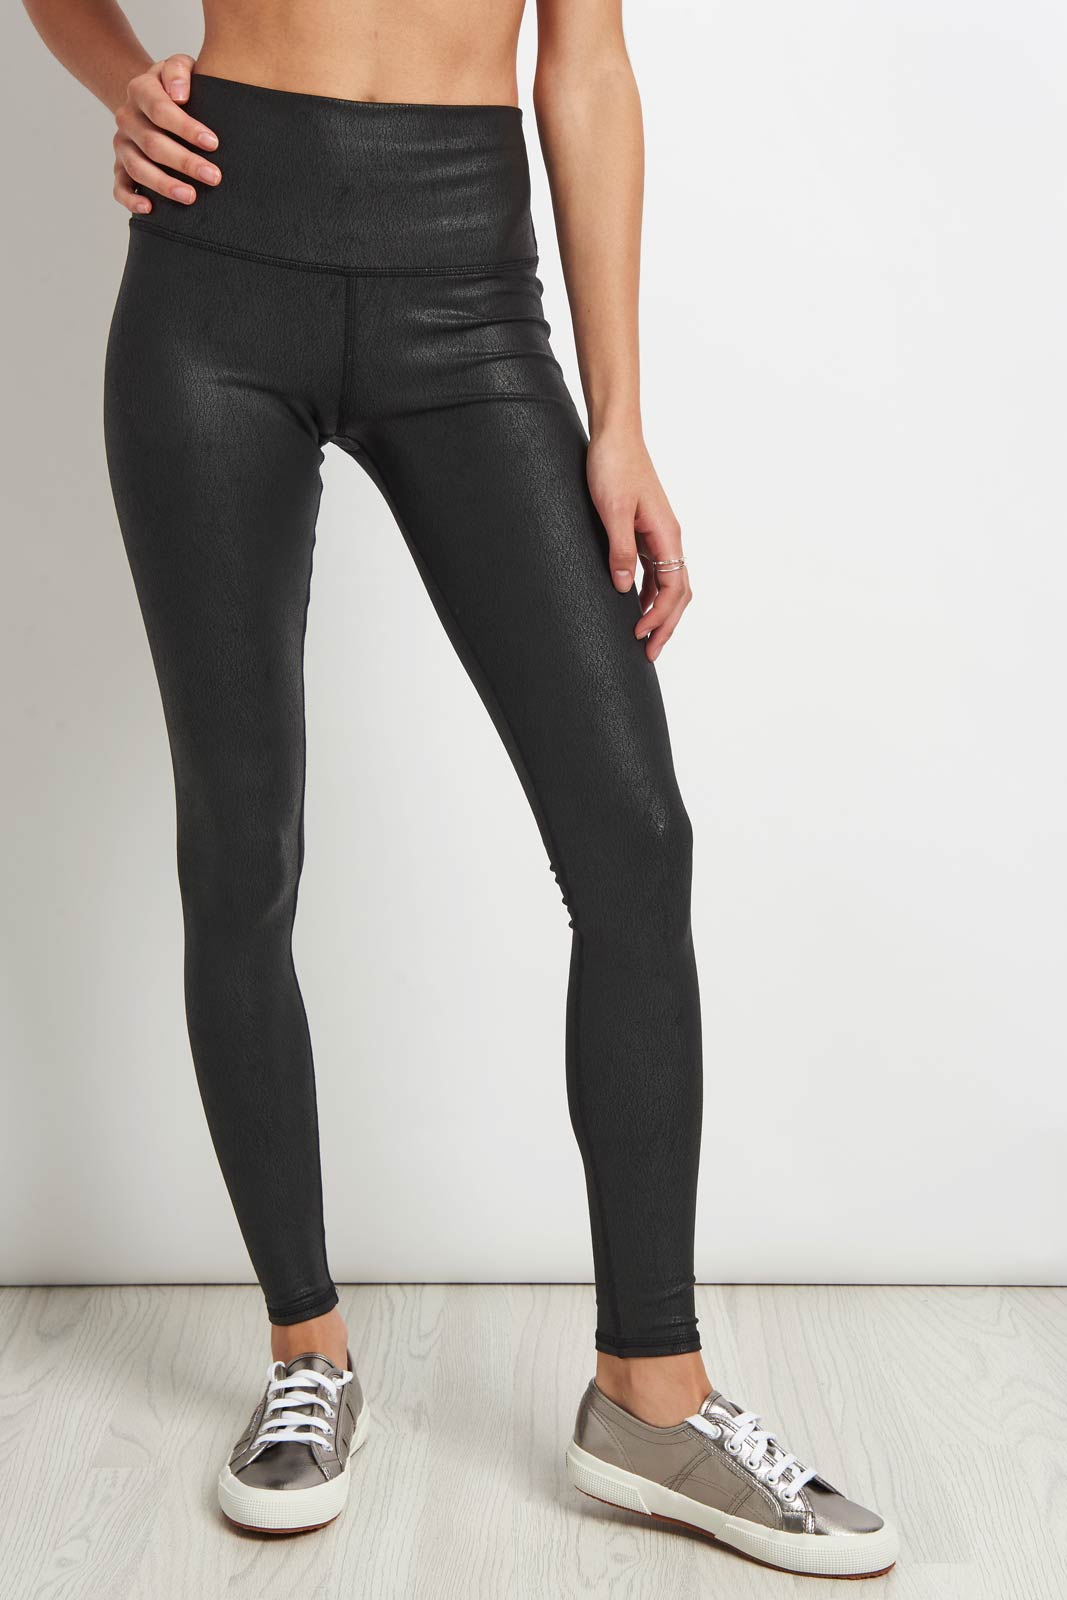 Alo Yoga High Waisted Airbrush Legging Blk/perf Leather